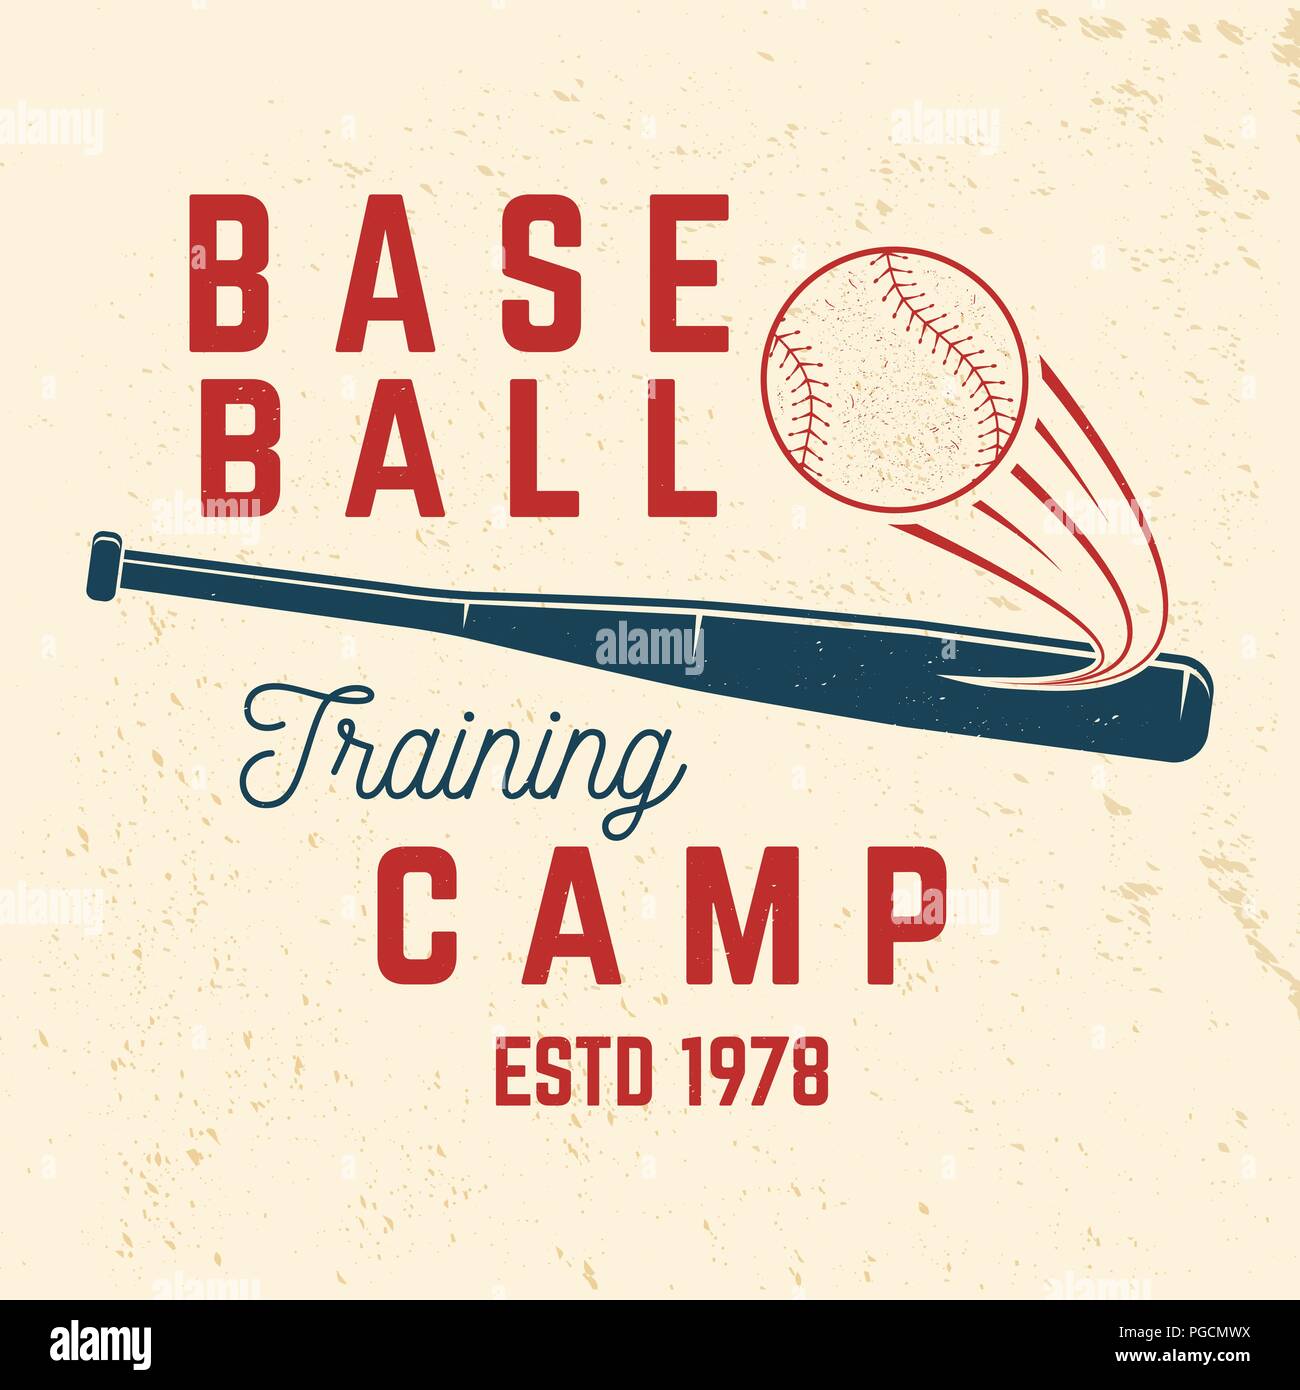 Baseball training camp. Vector illustration. Concept for shirt or logo, print, stamp or tee. Vintage typography design with baseball bat and ball for baseball silhouette. Stock Vector